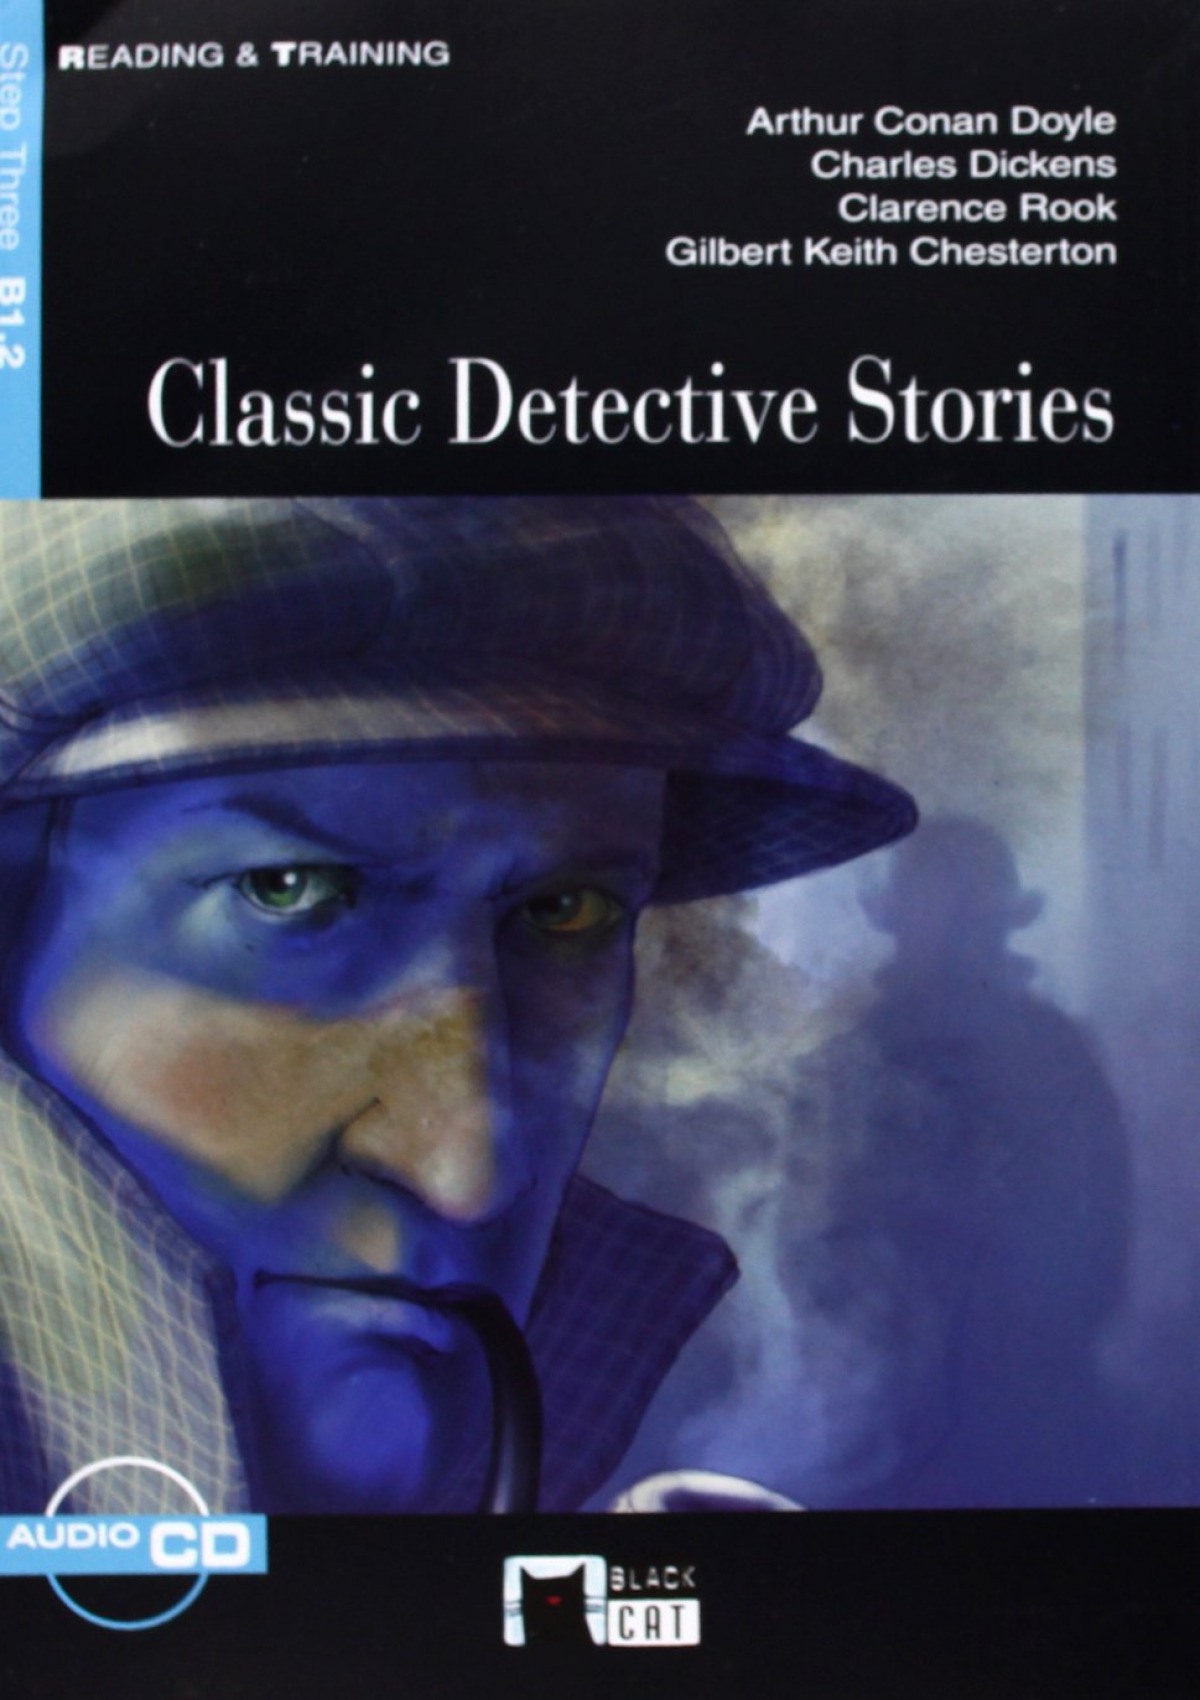 Classic Detective Stories ESO. Material auxiliar - Dickens, Charles                                  Conan Doyle, Arthur                               Rook, Clarence / Keith Chesterton, Gilbert